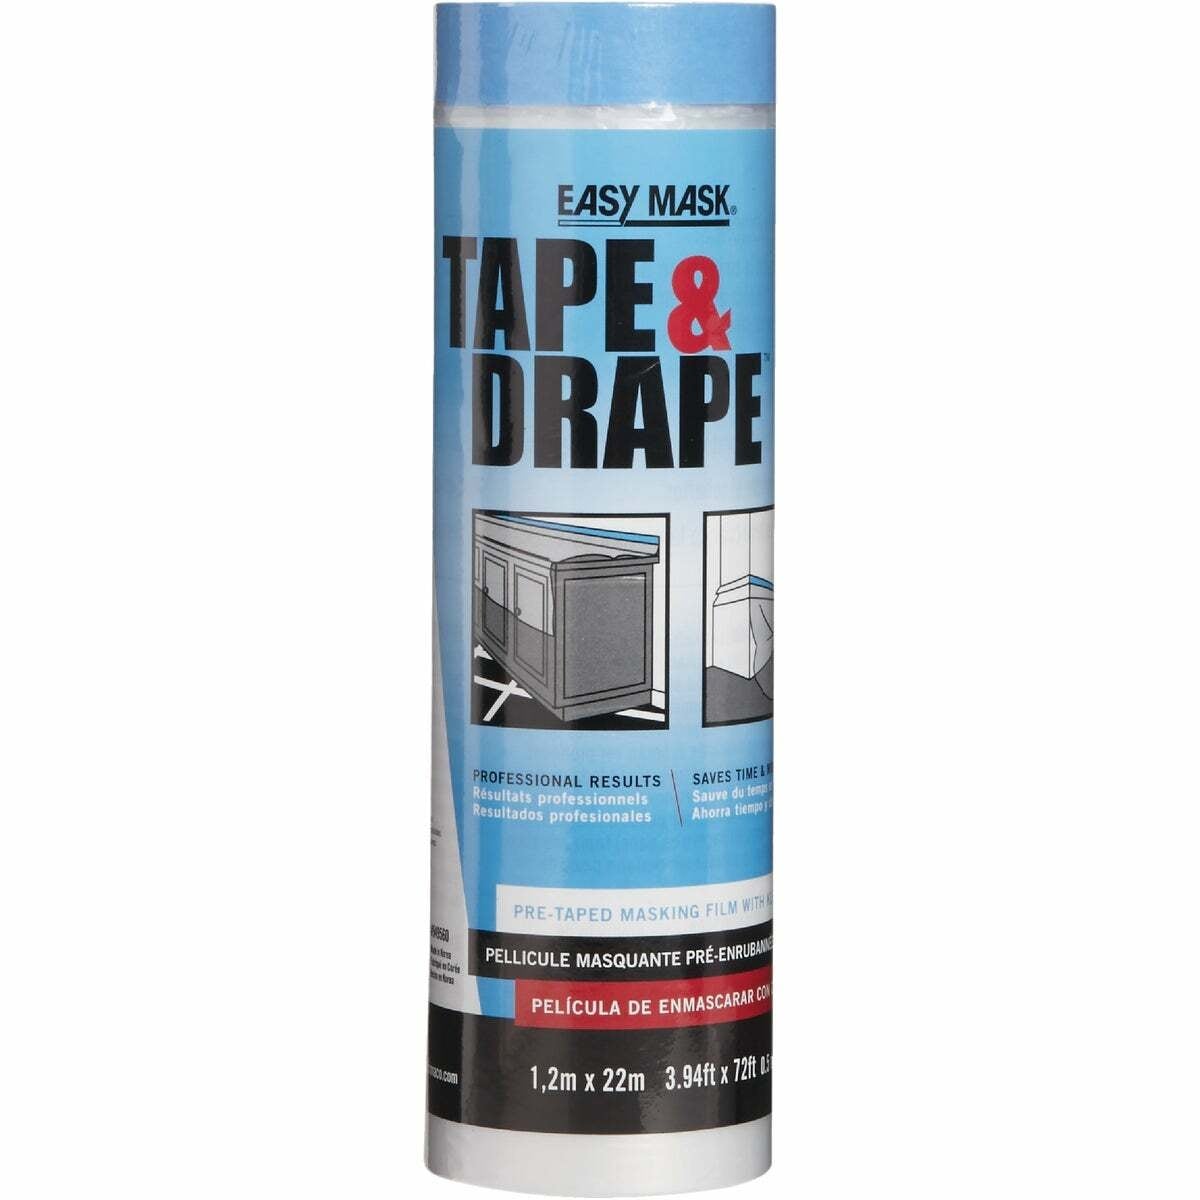 Trimaco Tape & Drape Pre-Taped Plastic 4 Ft. x 75 Ft. 1/2 mil Drop Cloth - 1 Each - Clear